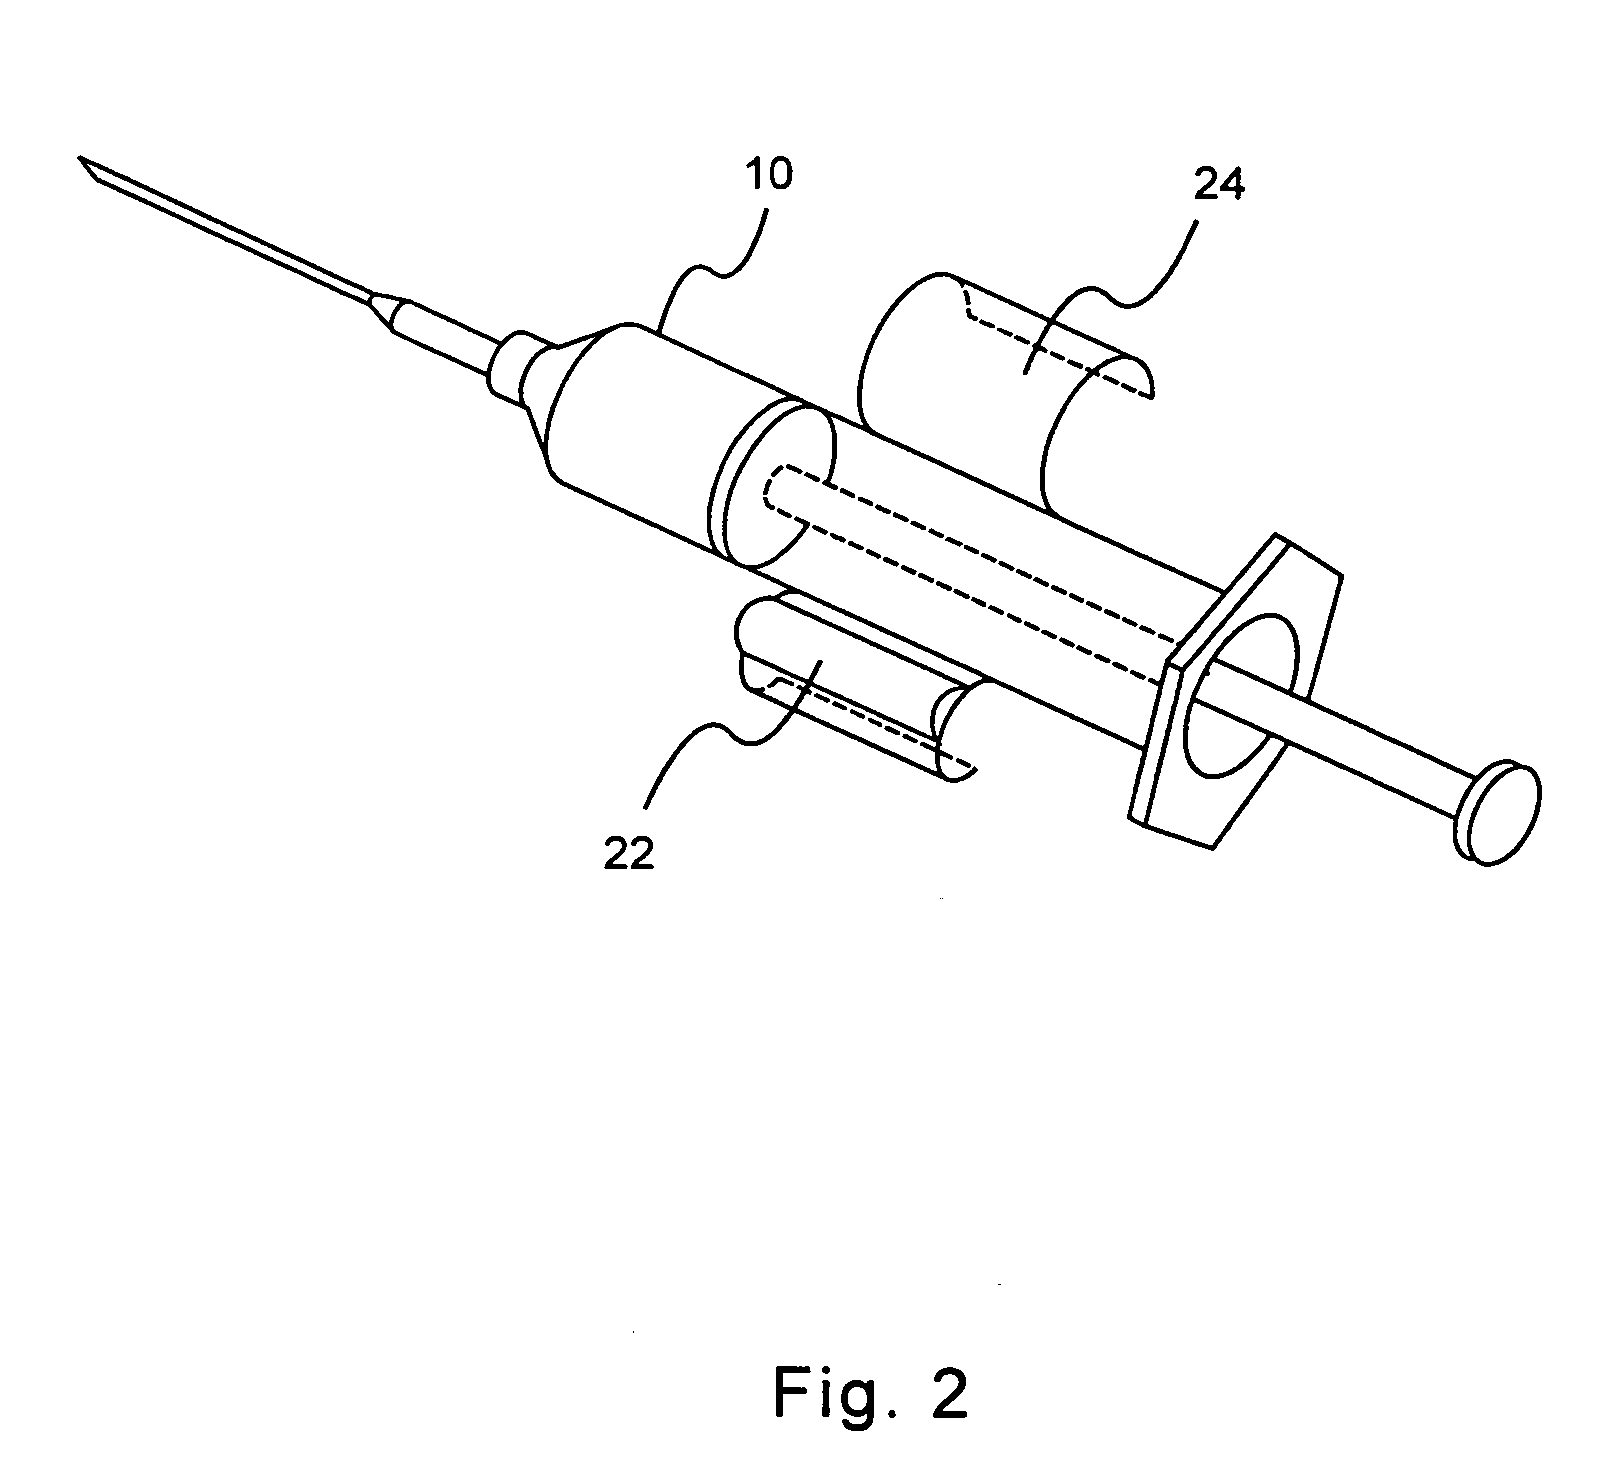 Hypodermic Syringe With Vial Attachment